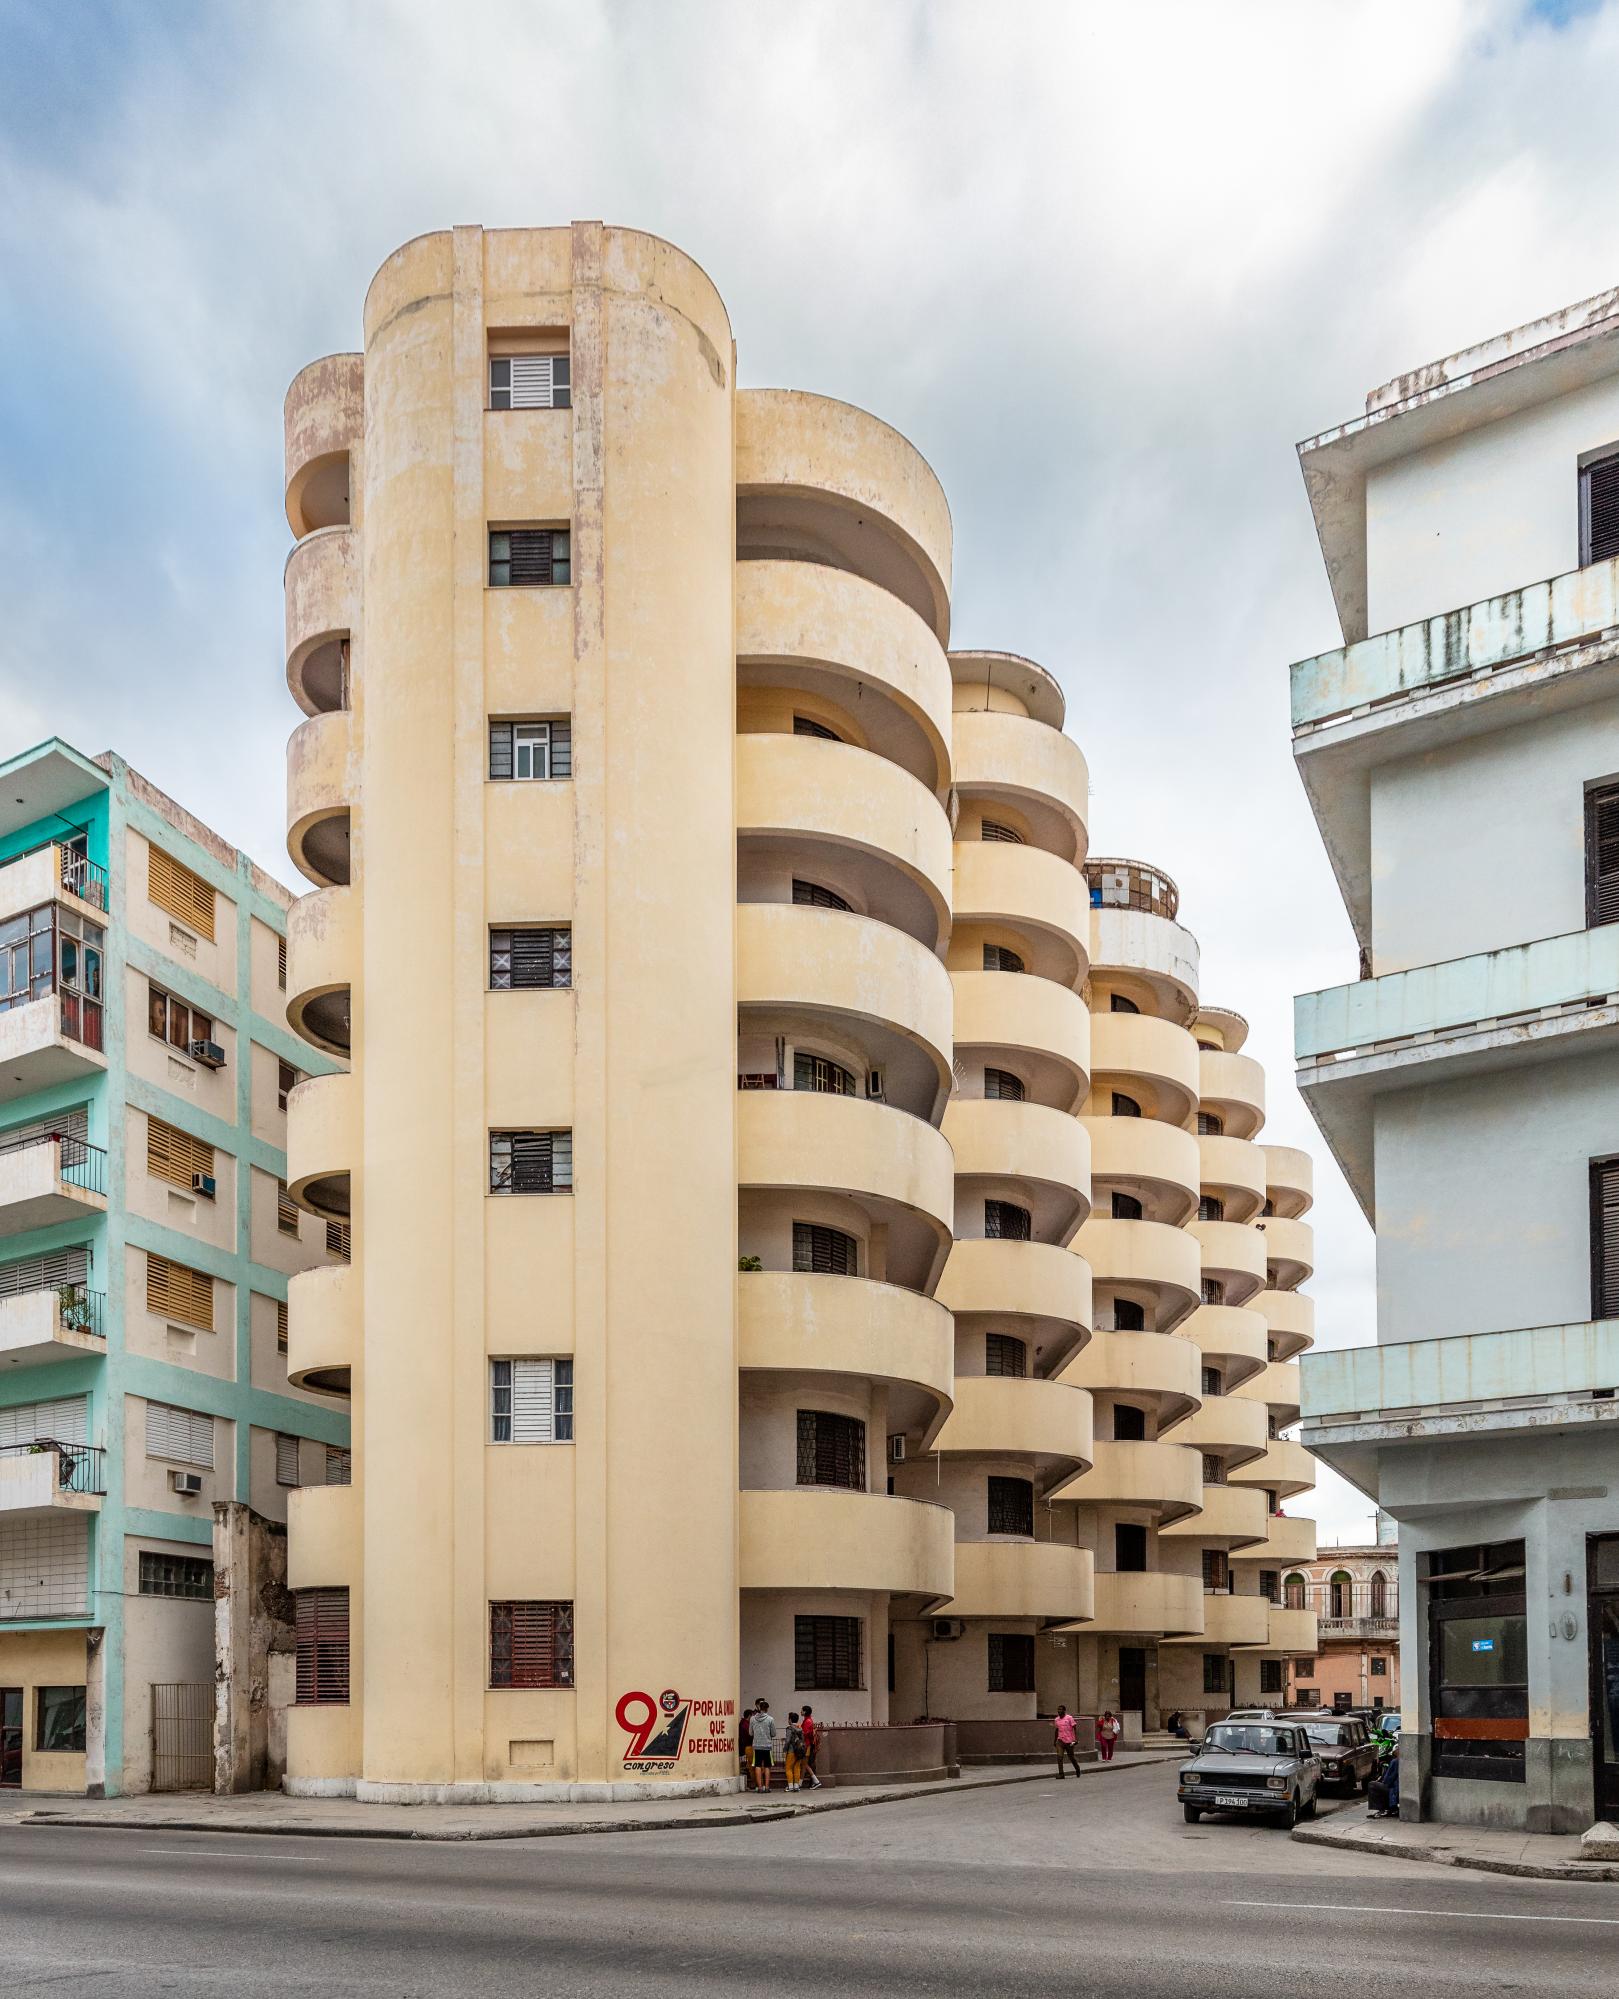 Connecting Concrete: Modernist Architecture from Havana to Miami - Solimar Building, 1944  